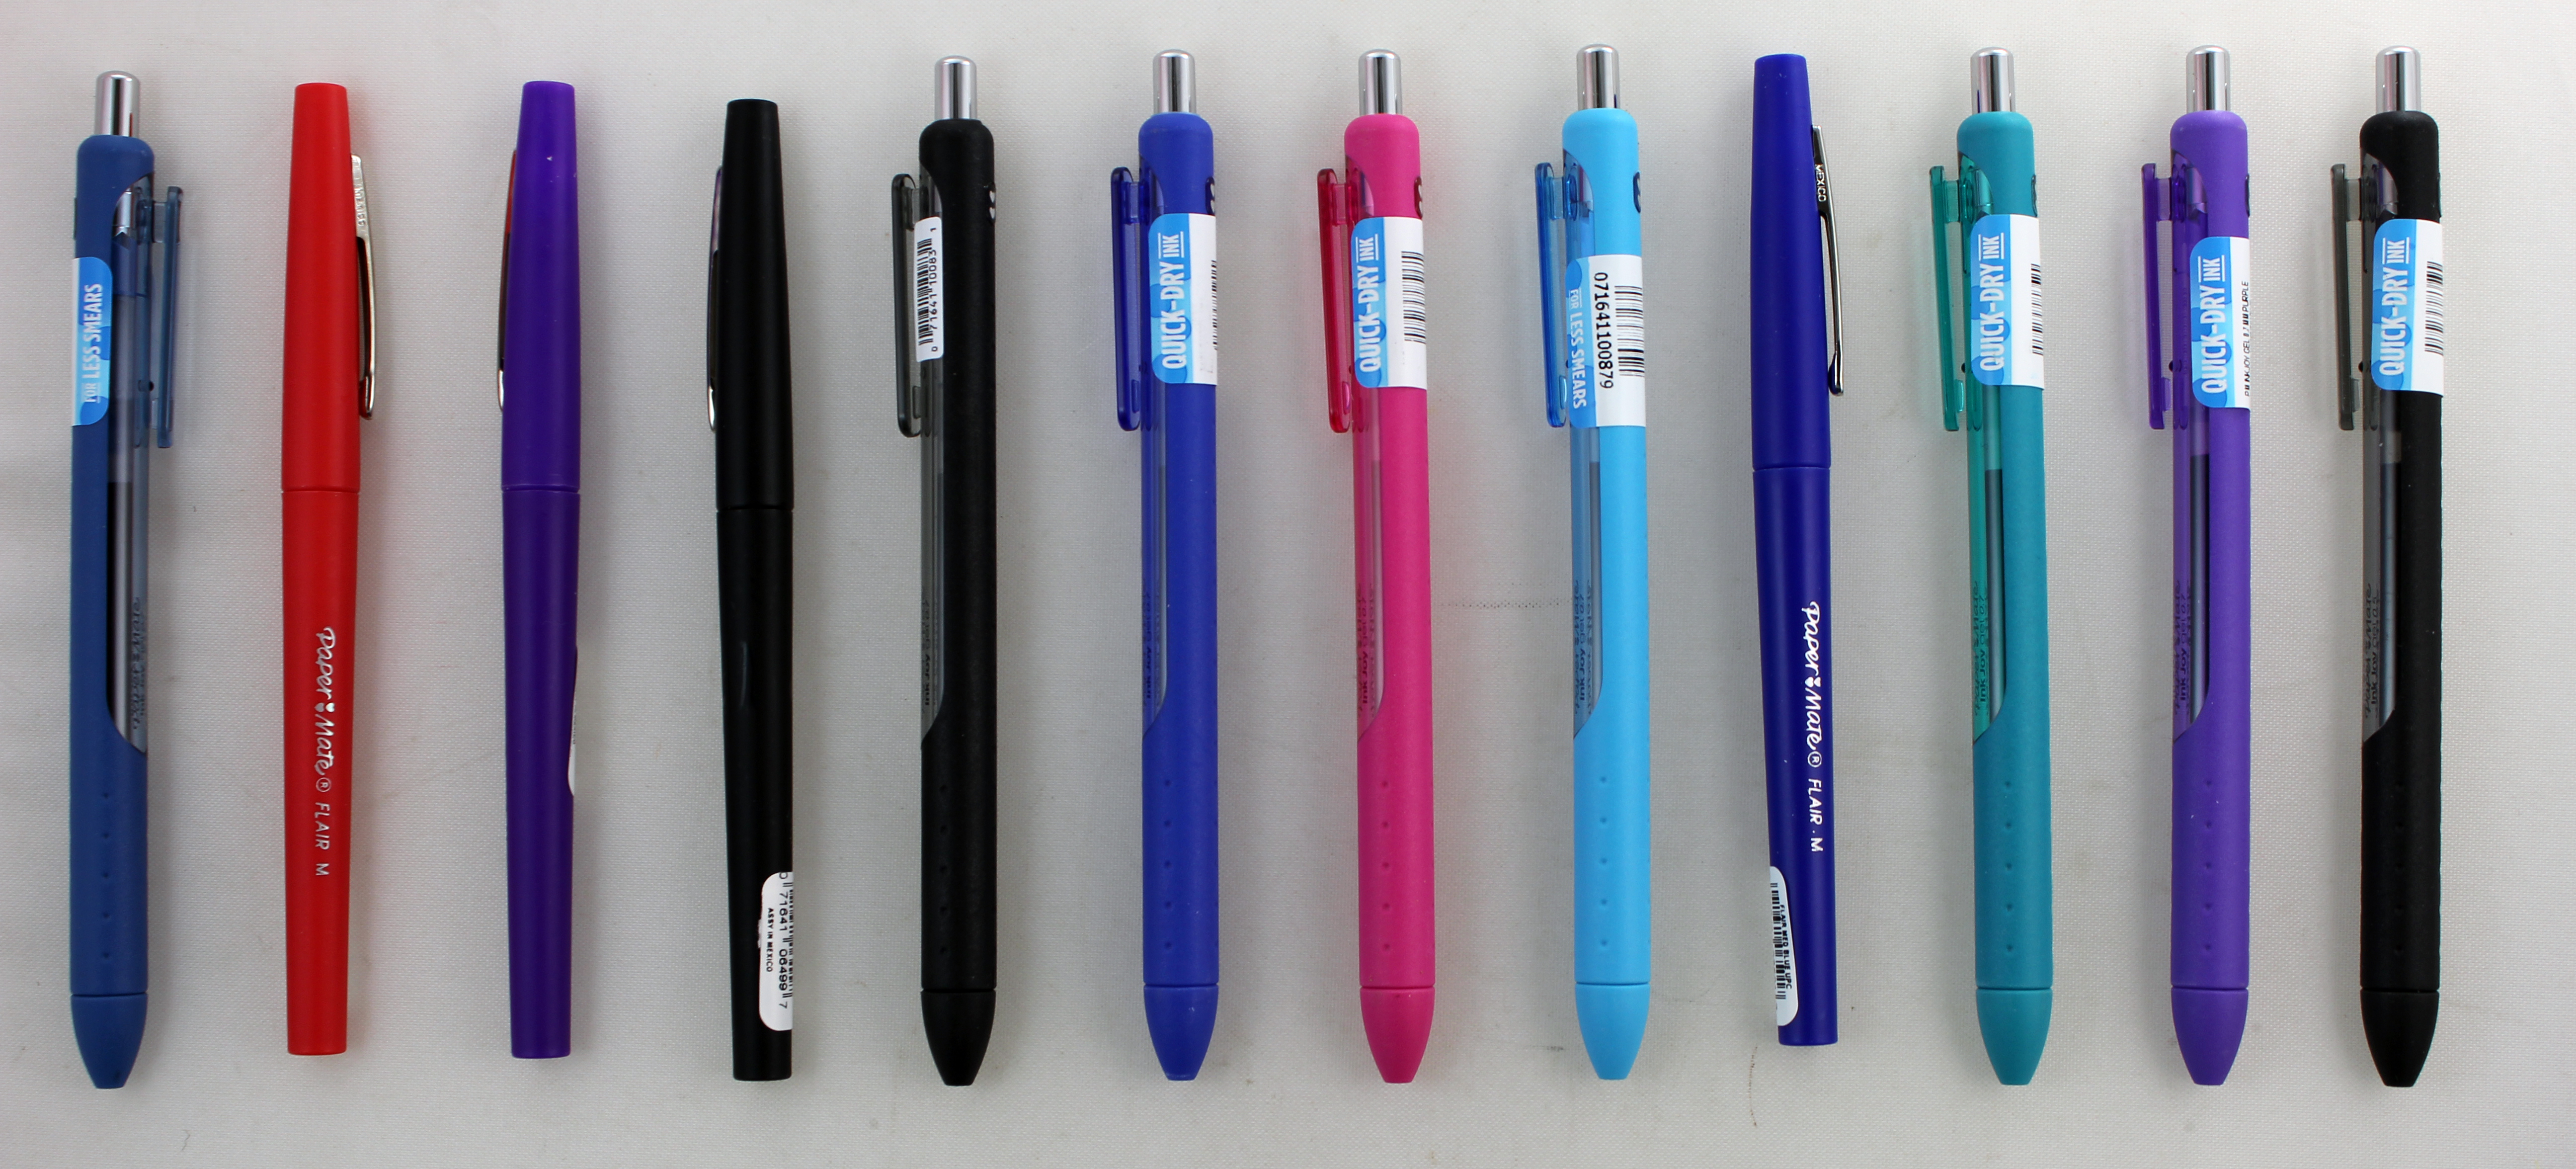 Papermate Pen Mix 12 Types, (12ct each type) 144 Total